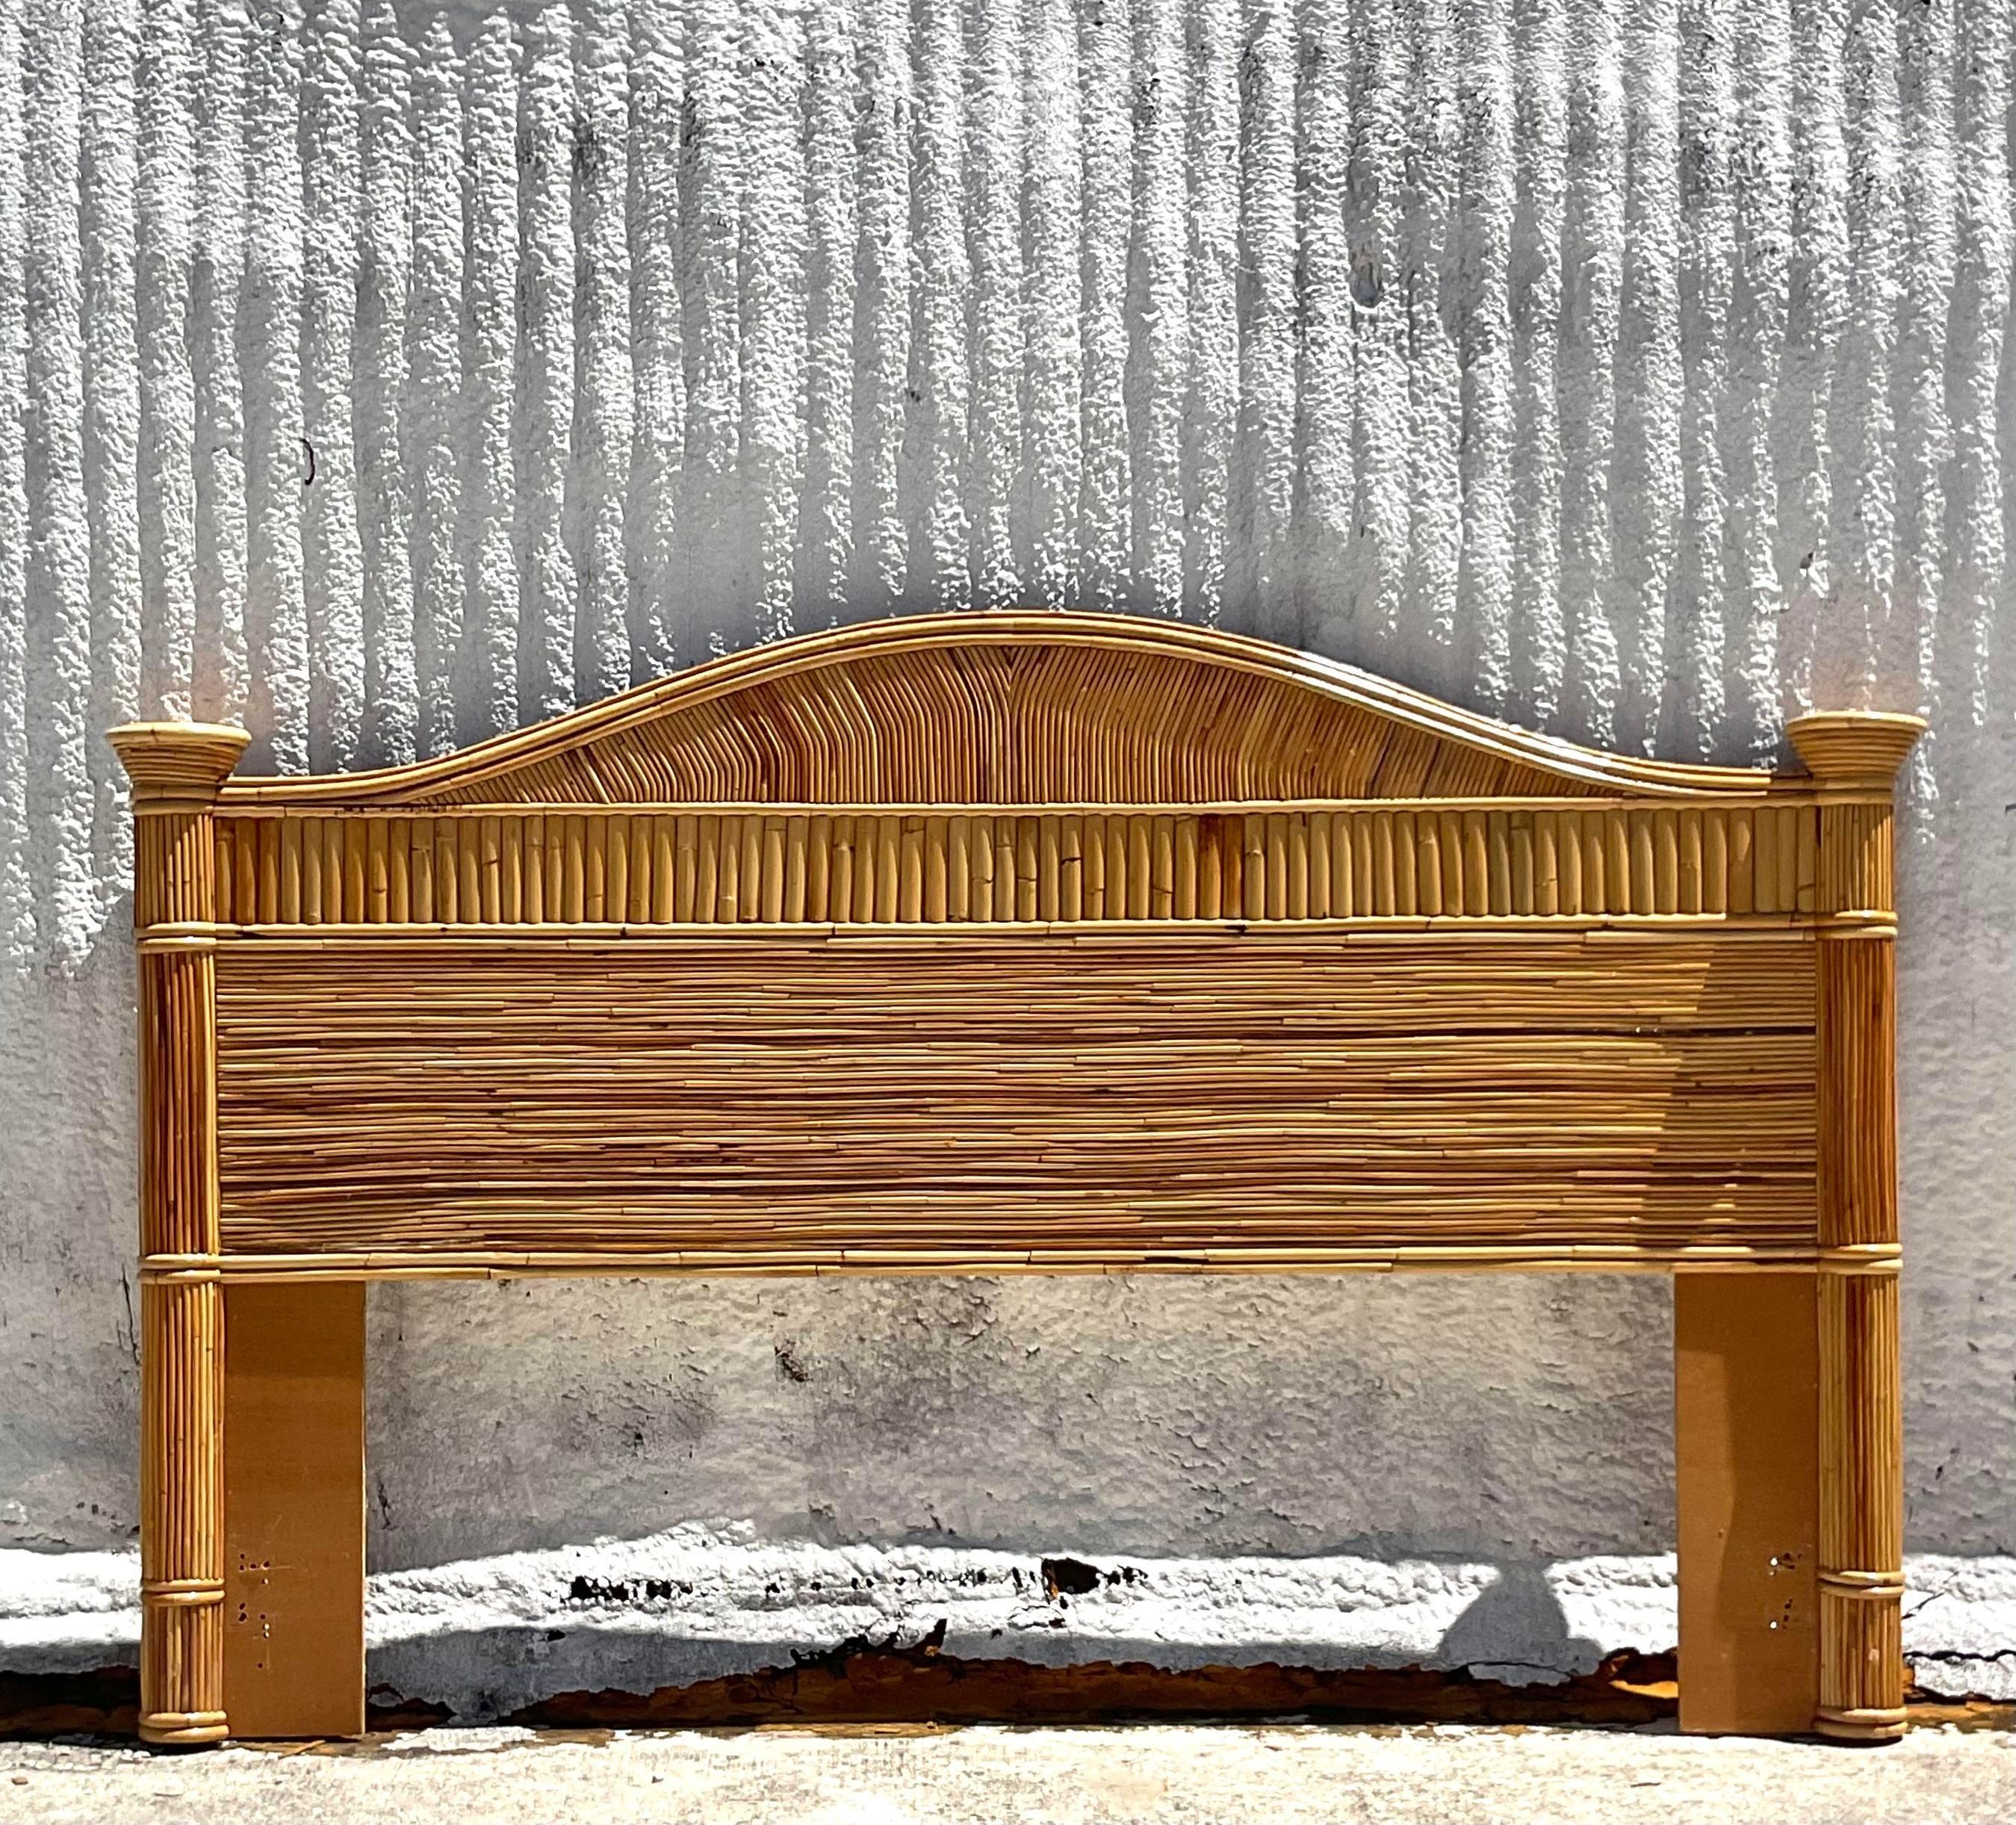 Transform your bedroom into a coastal retreat with this Vintage Pencil Reed King Headboard. Inspired by classic American craftsmanship, this headboard exudes timeless charm with its coastal aesthetic and intricate woven design. Crafted to